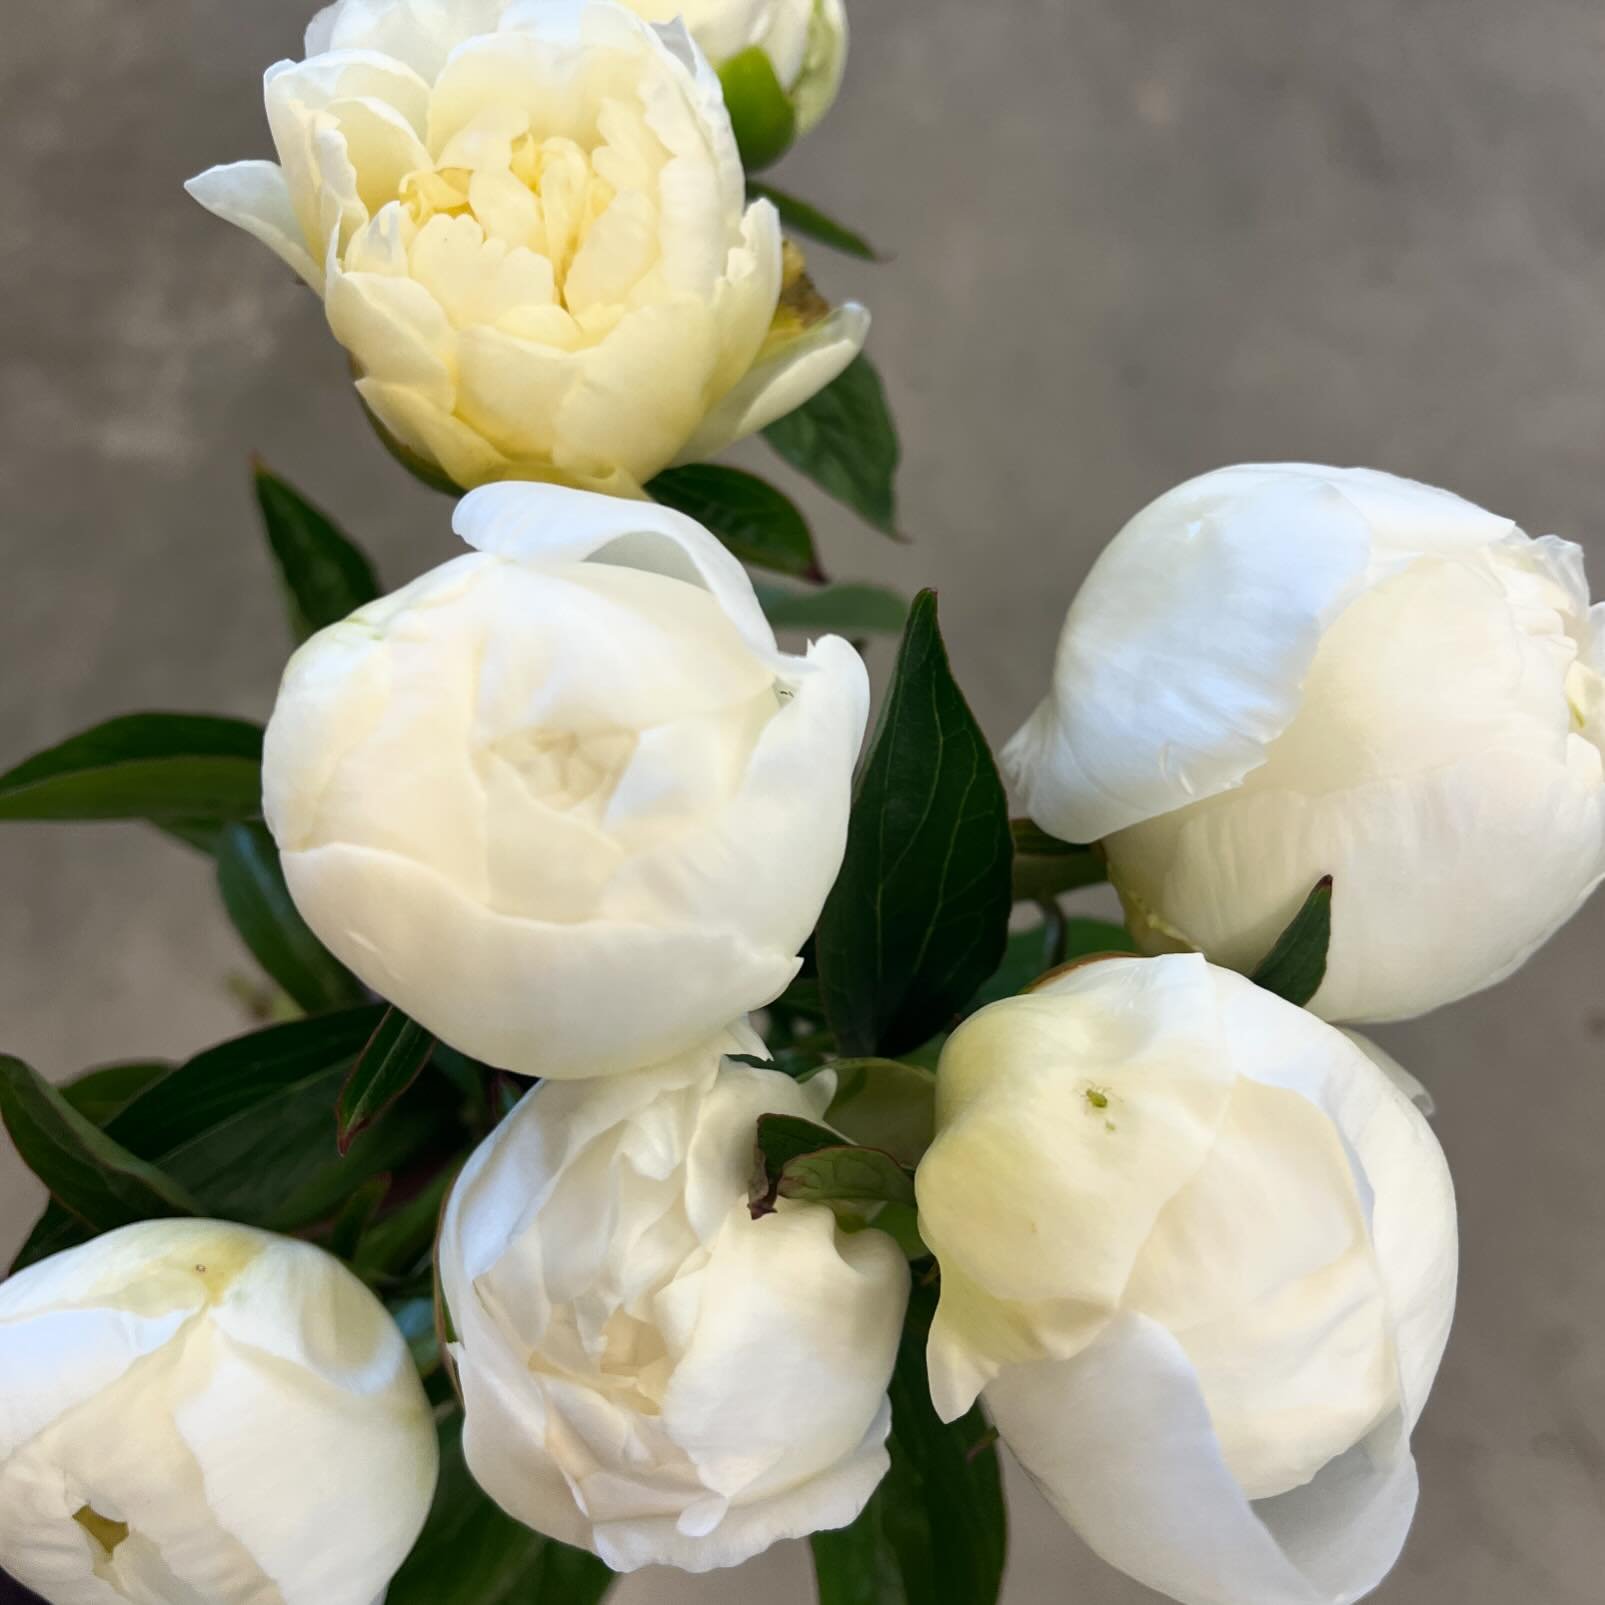 Duchess de Nemours is making a grand entrance!  Silken petals with a slight yellow glow at the center. Smells delicious!

#goldencoastflowercollective #weddingflowers #floralinspiration